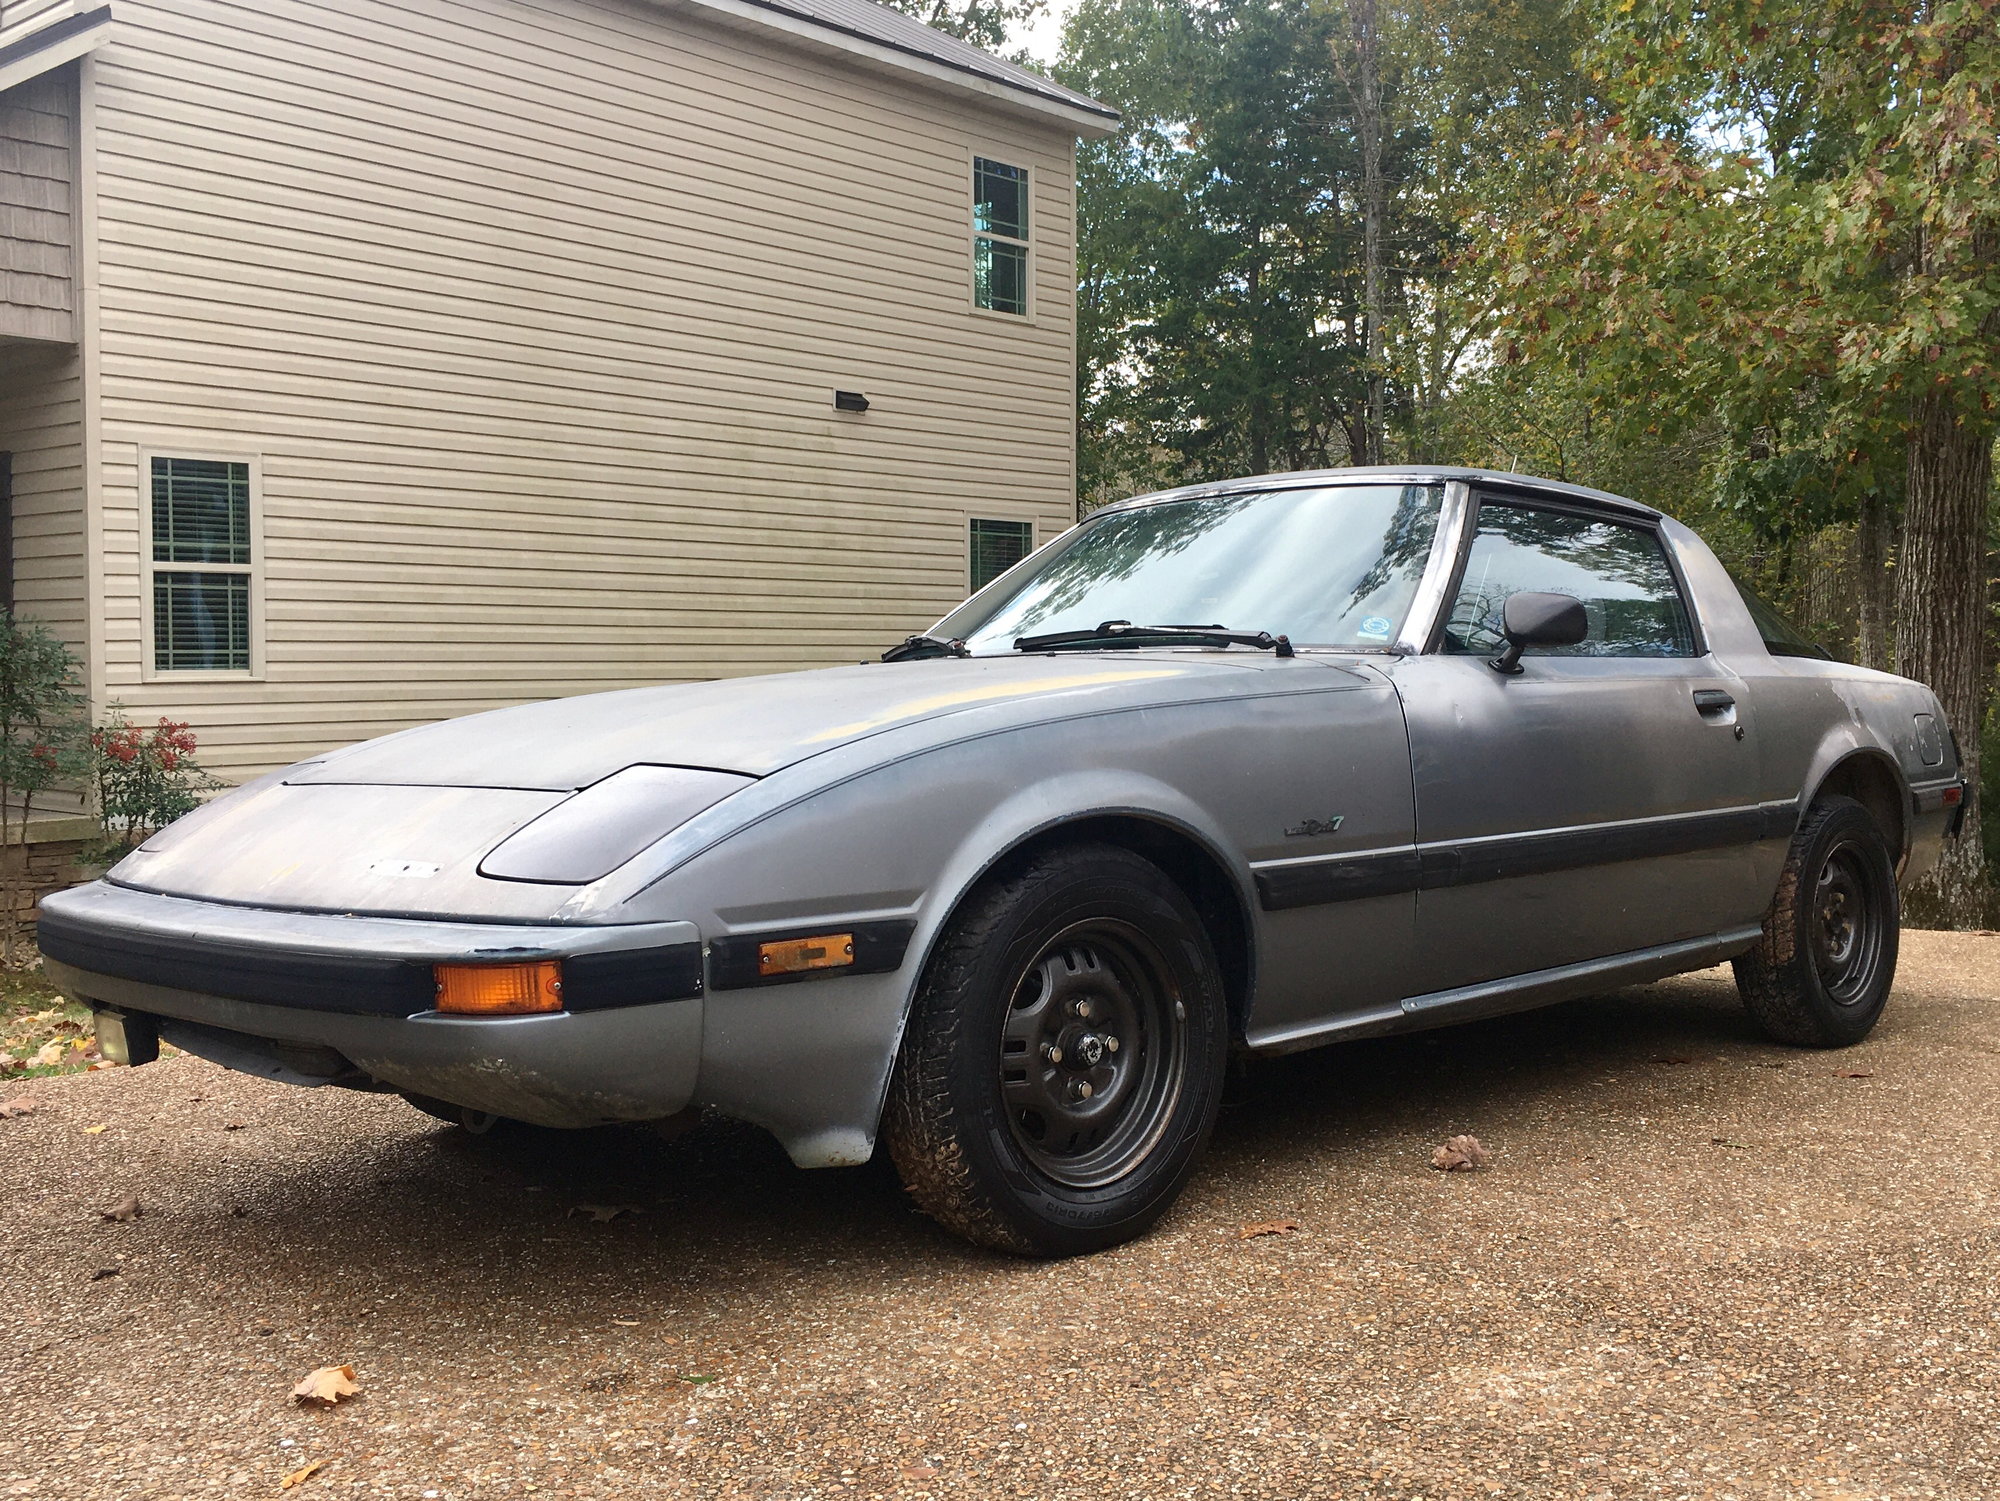 Straight - Solid - Southern '85 GS For Sale - RX7Club.com ...